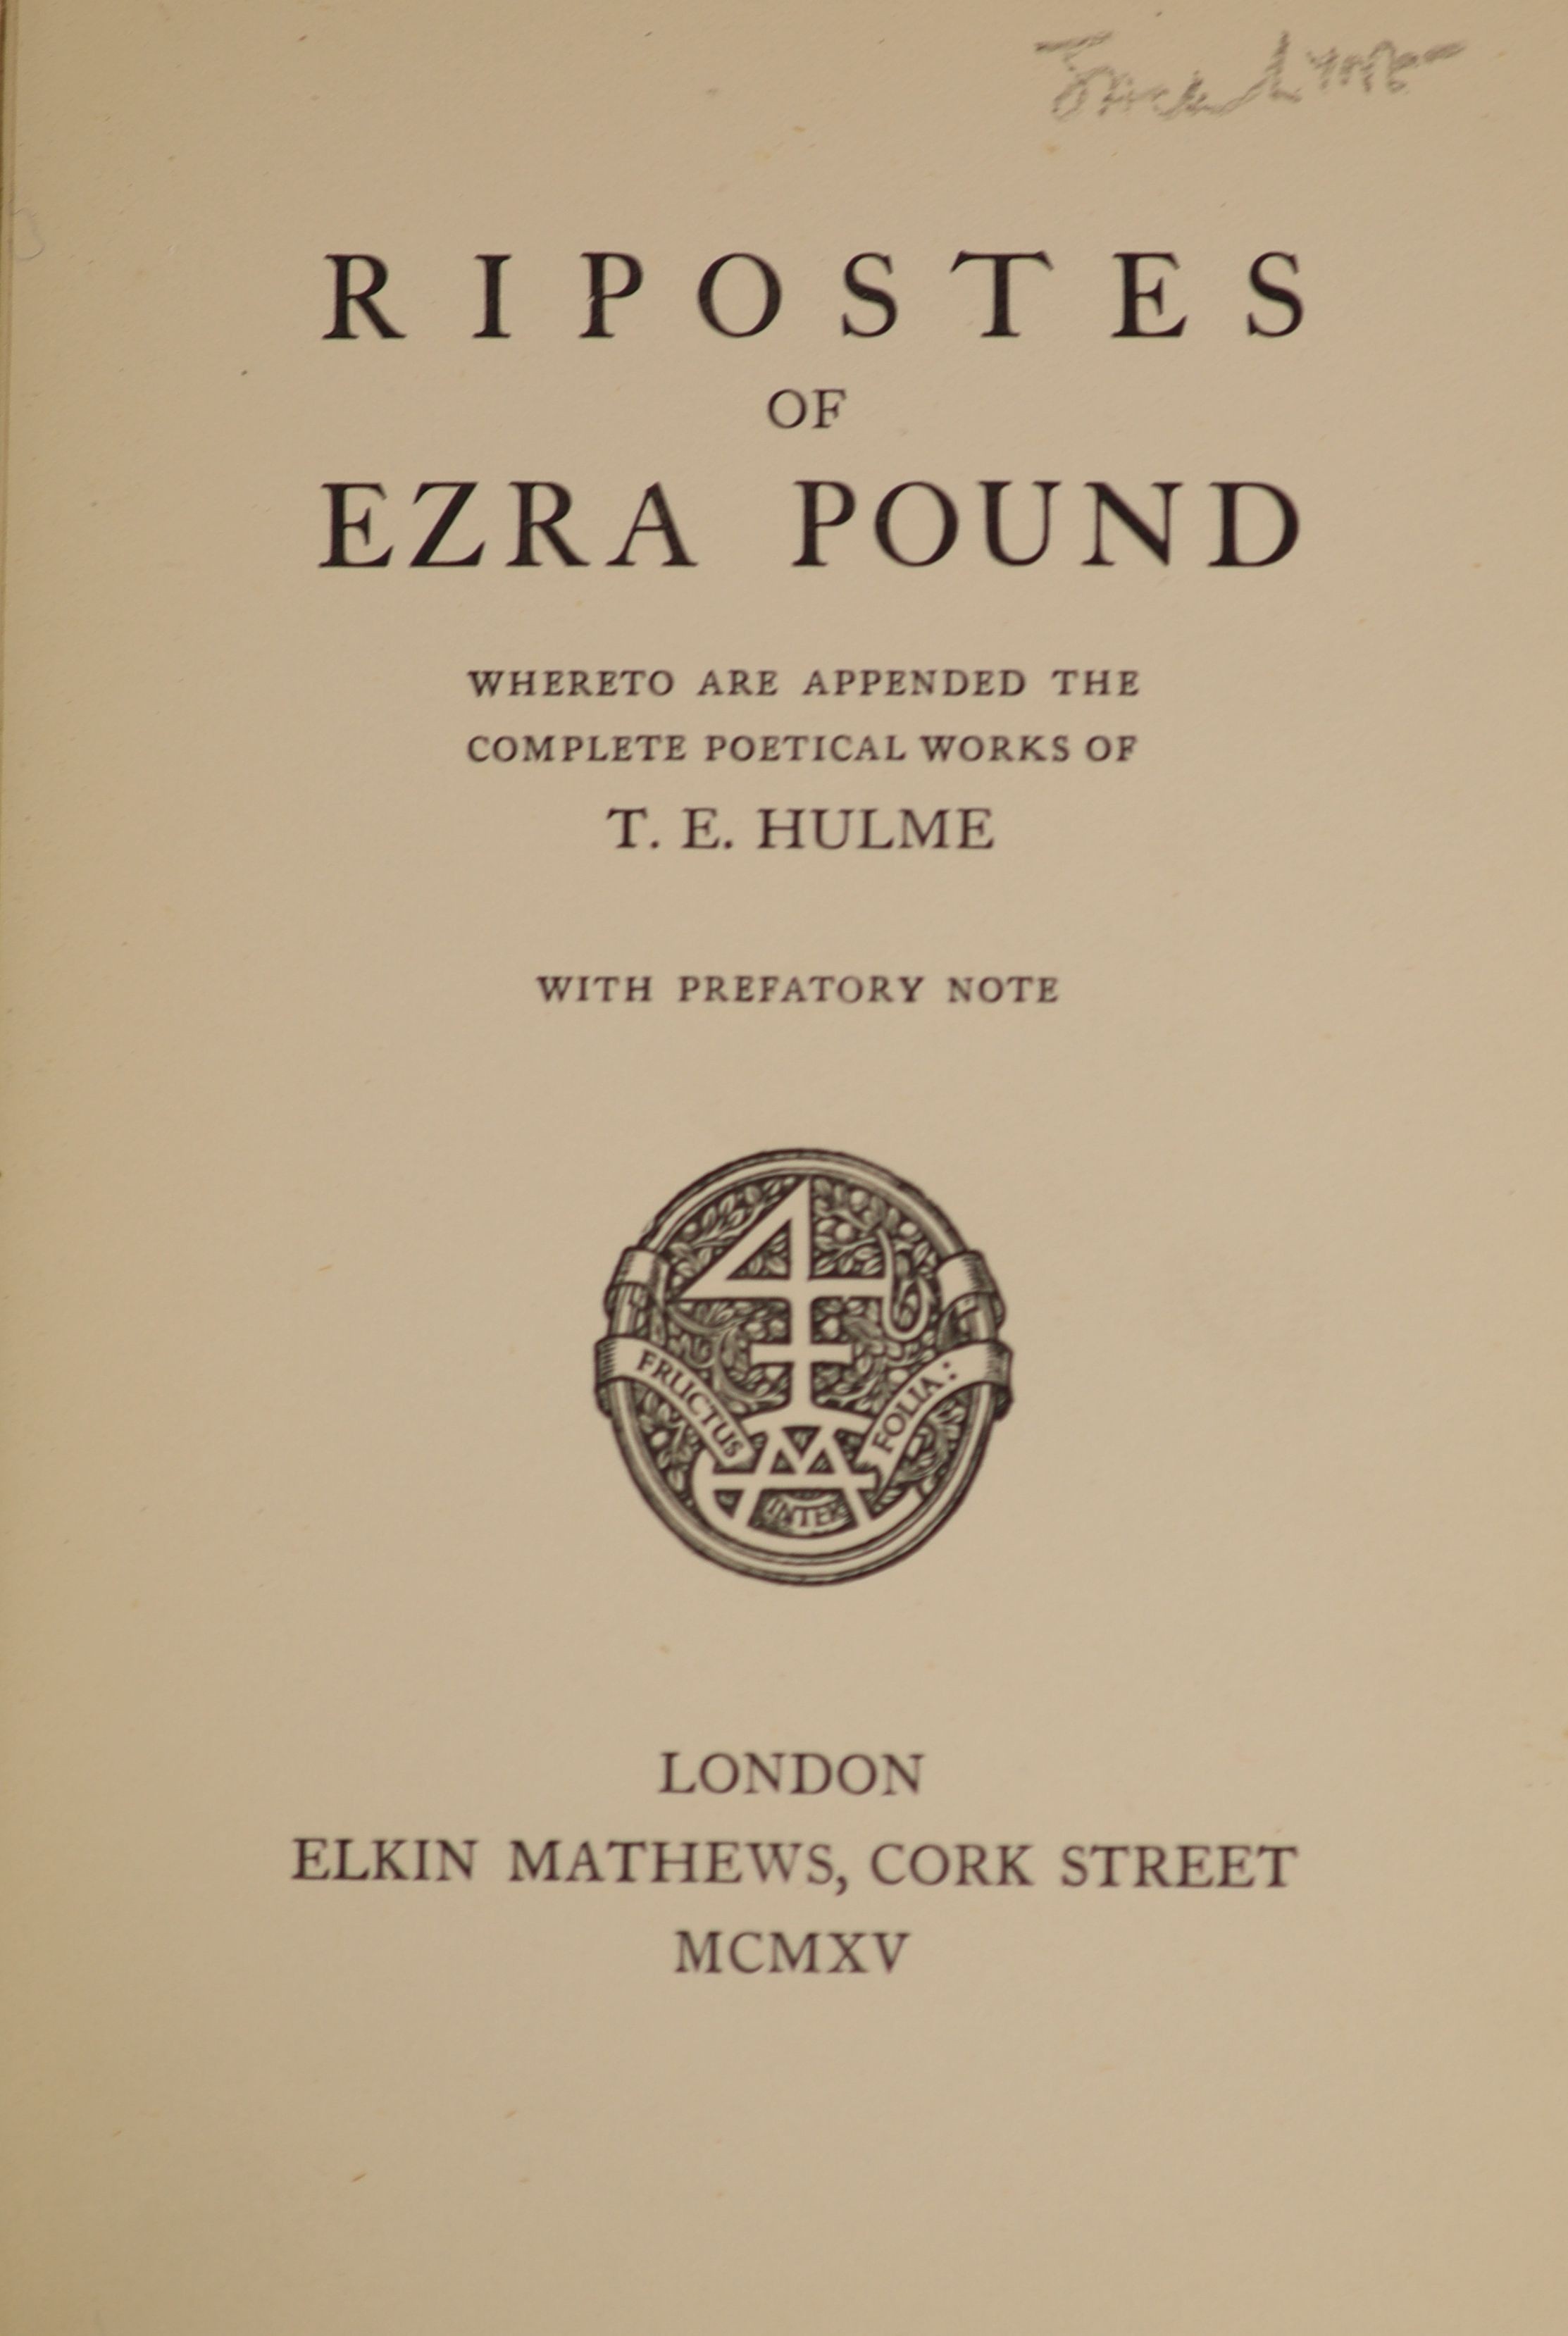 ° Pound, Ezra - Ripostes, 1st edition, one of 400, papers wrappers, with a Cubist design by - Image 2 of 2